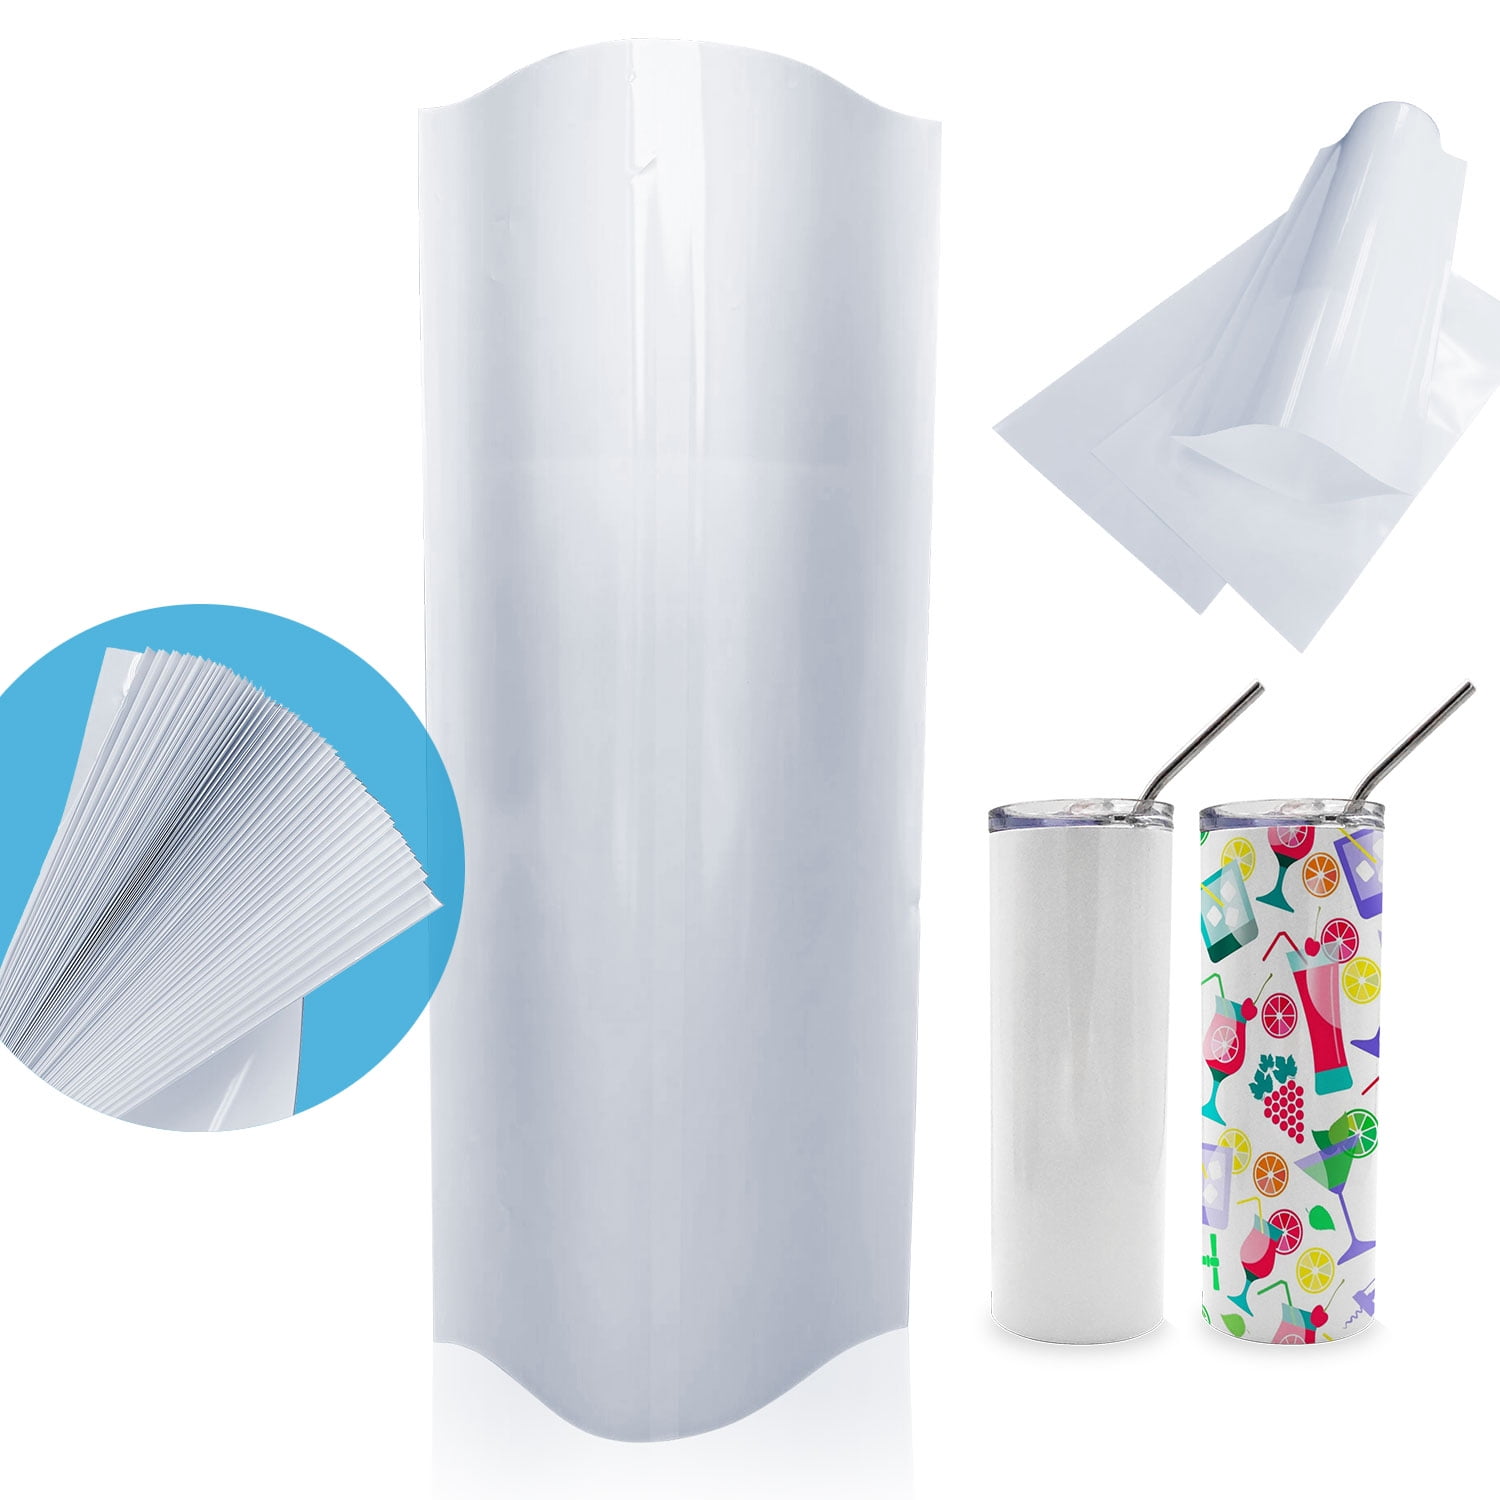 100 Pieces Sublimation Shrink Wrap Sleeves 5X10 Inch White Bag For 567G  Tight Tumblers, Heat Transfer